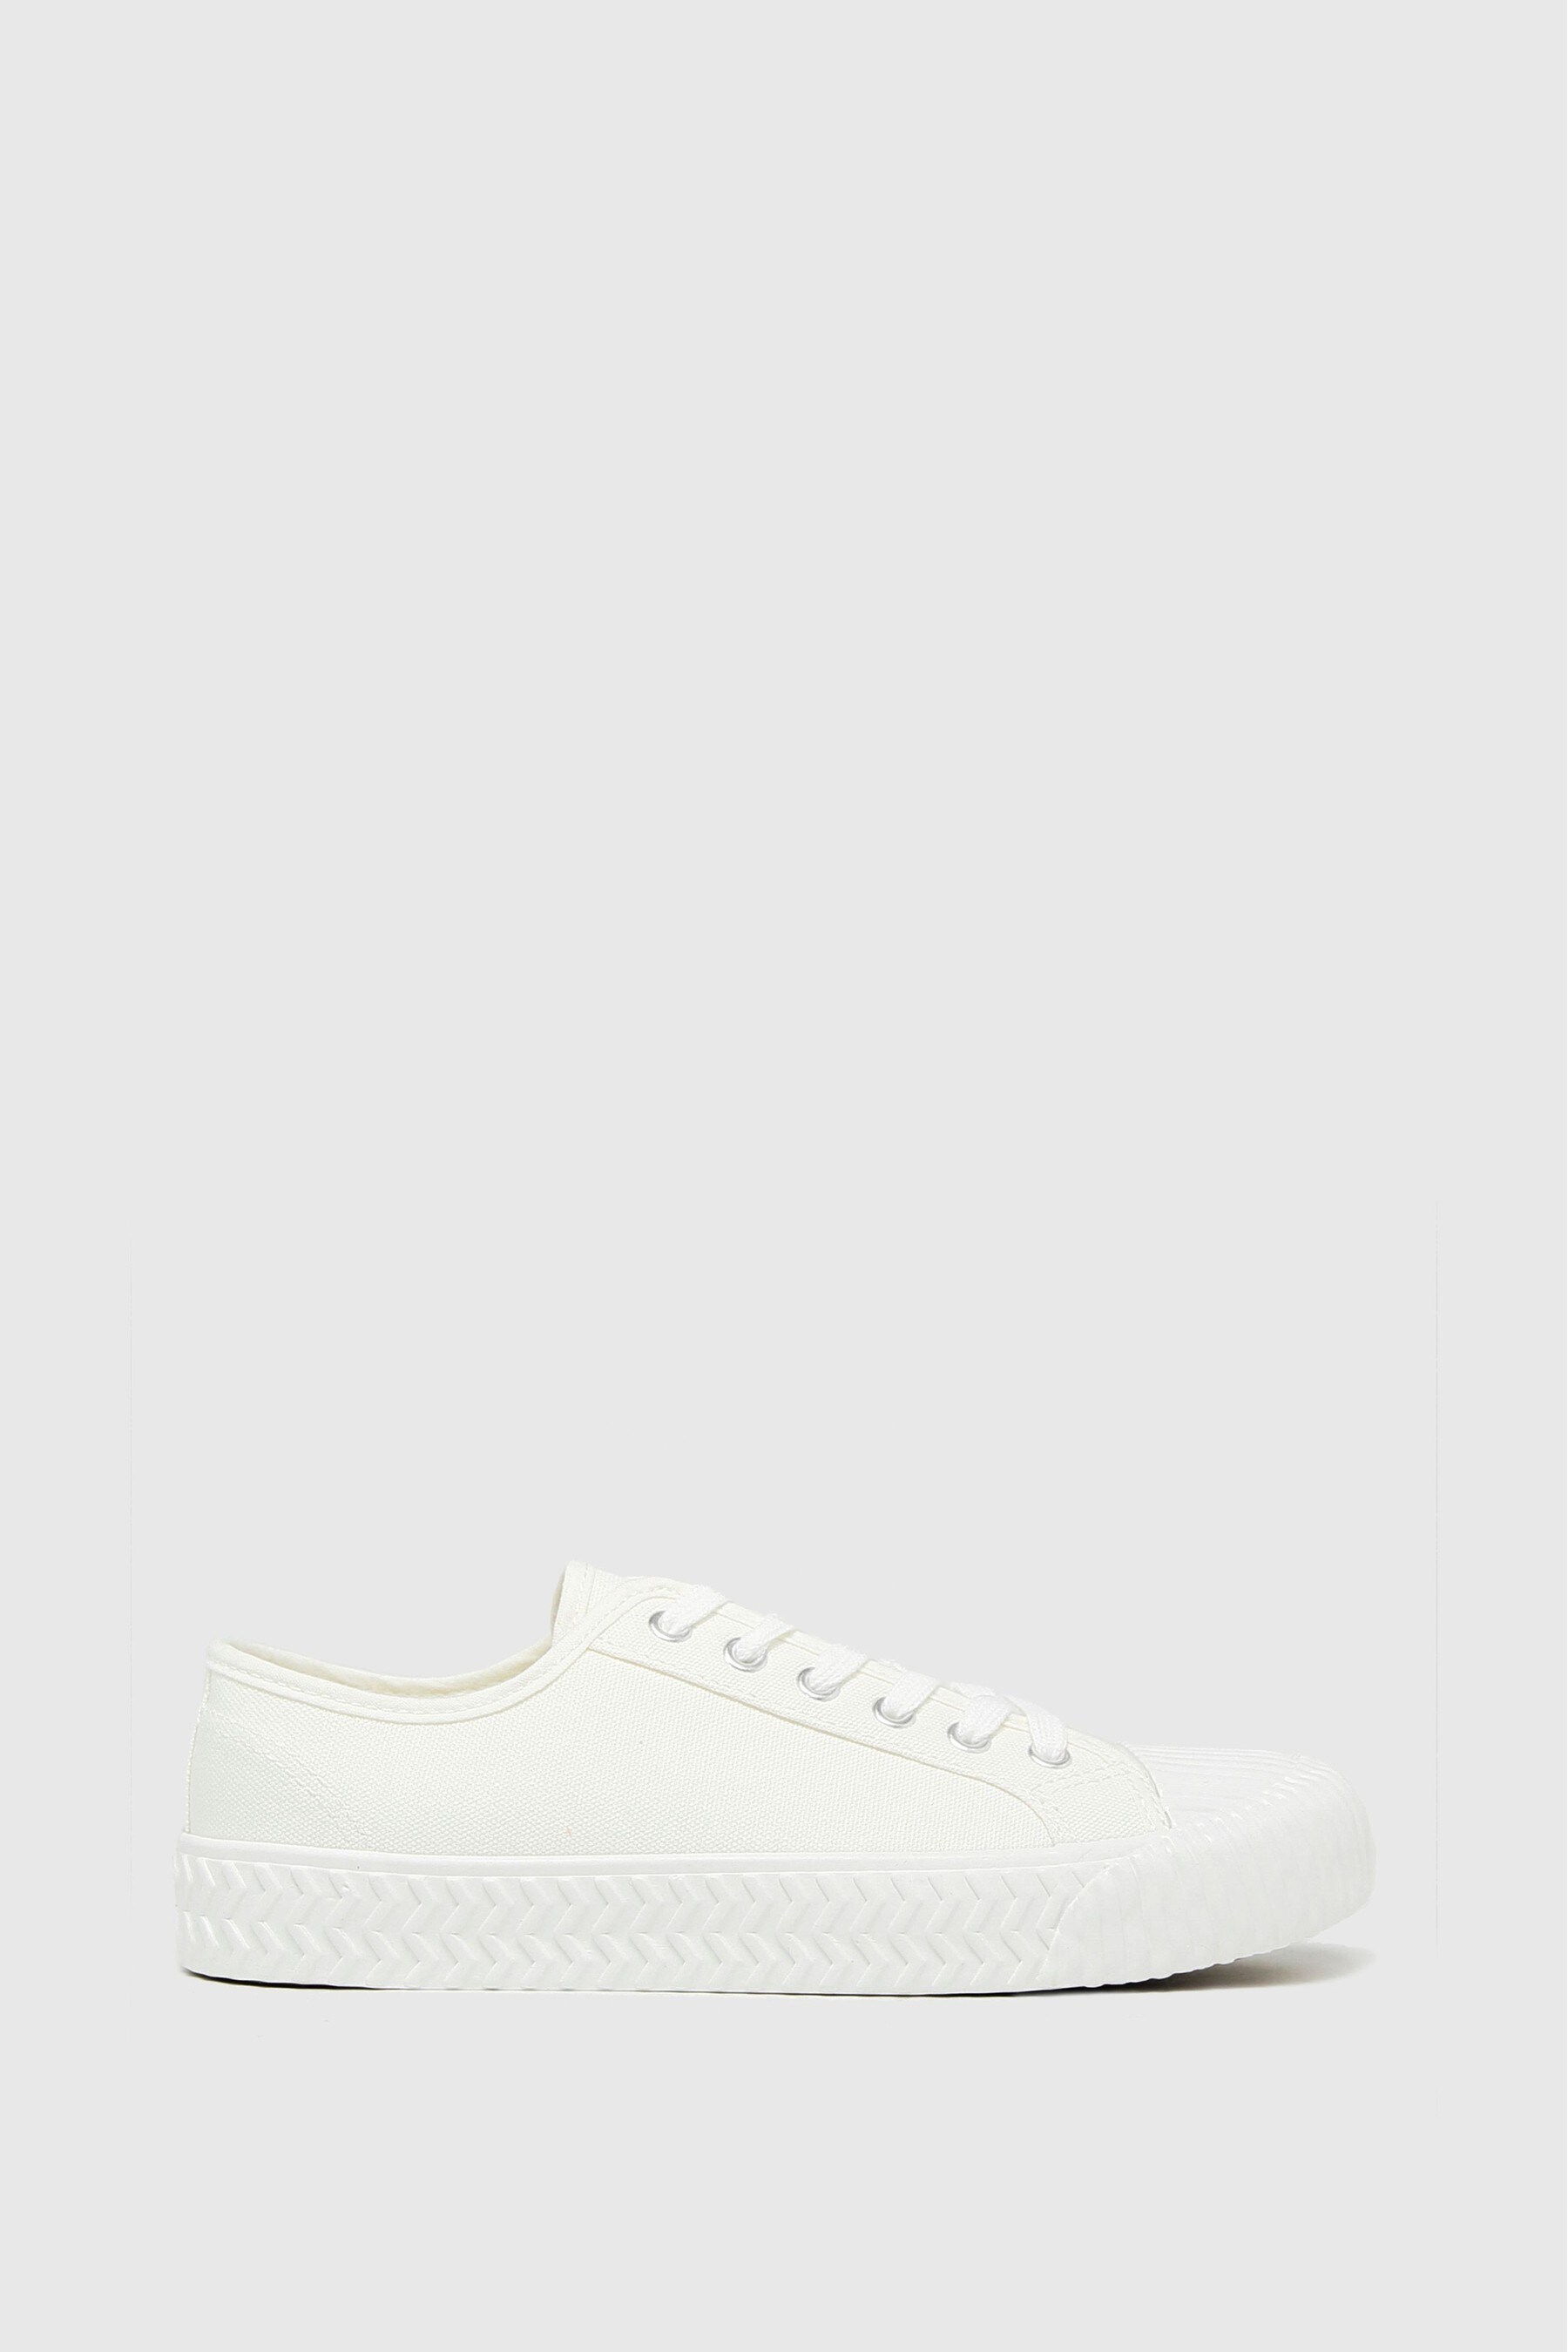 Buy Schuh Women's White Mia Canvas Lace-Up Shoes from the Next UK ...